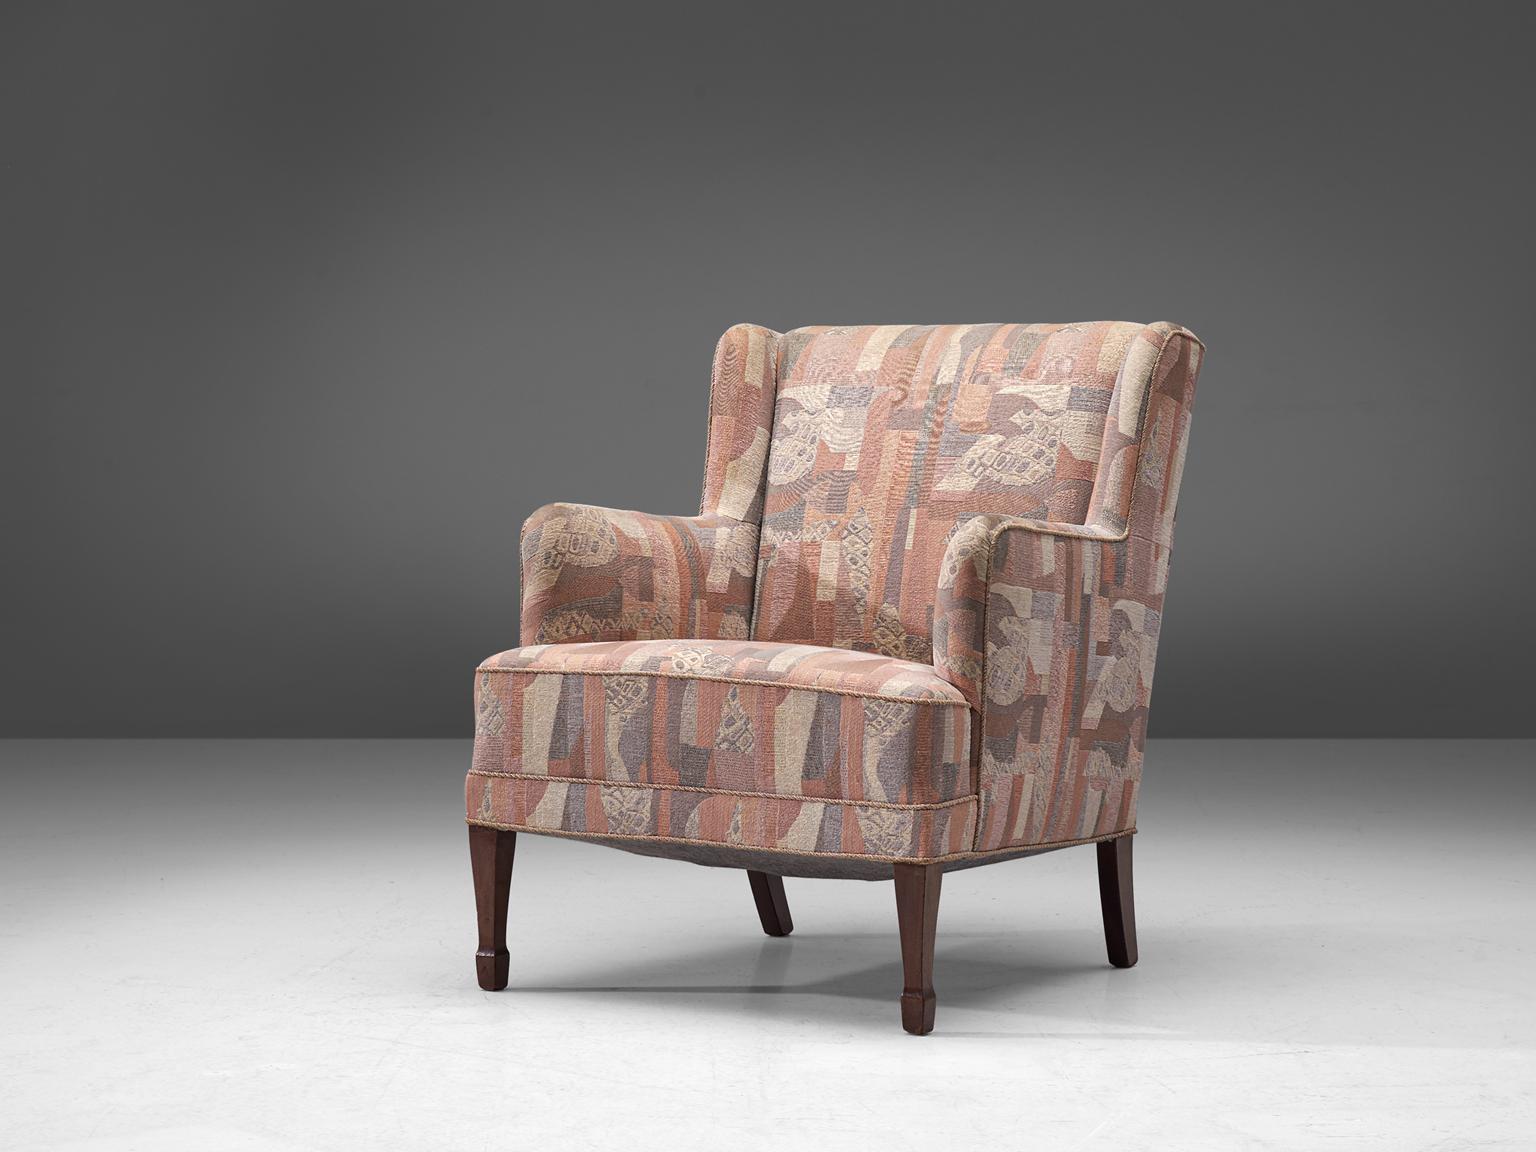 Frits Henningsen, wingback chair, multicolored pastel fabric, stained beech, Denmark 1930s.

This modest yet refined armchair is a classic piece from designer Frits Henningsen. The four legs consist of stained beech. The backrests hold small wings,